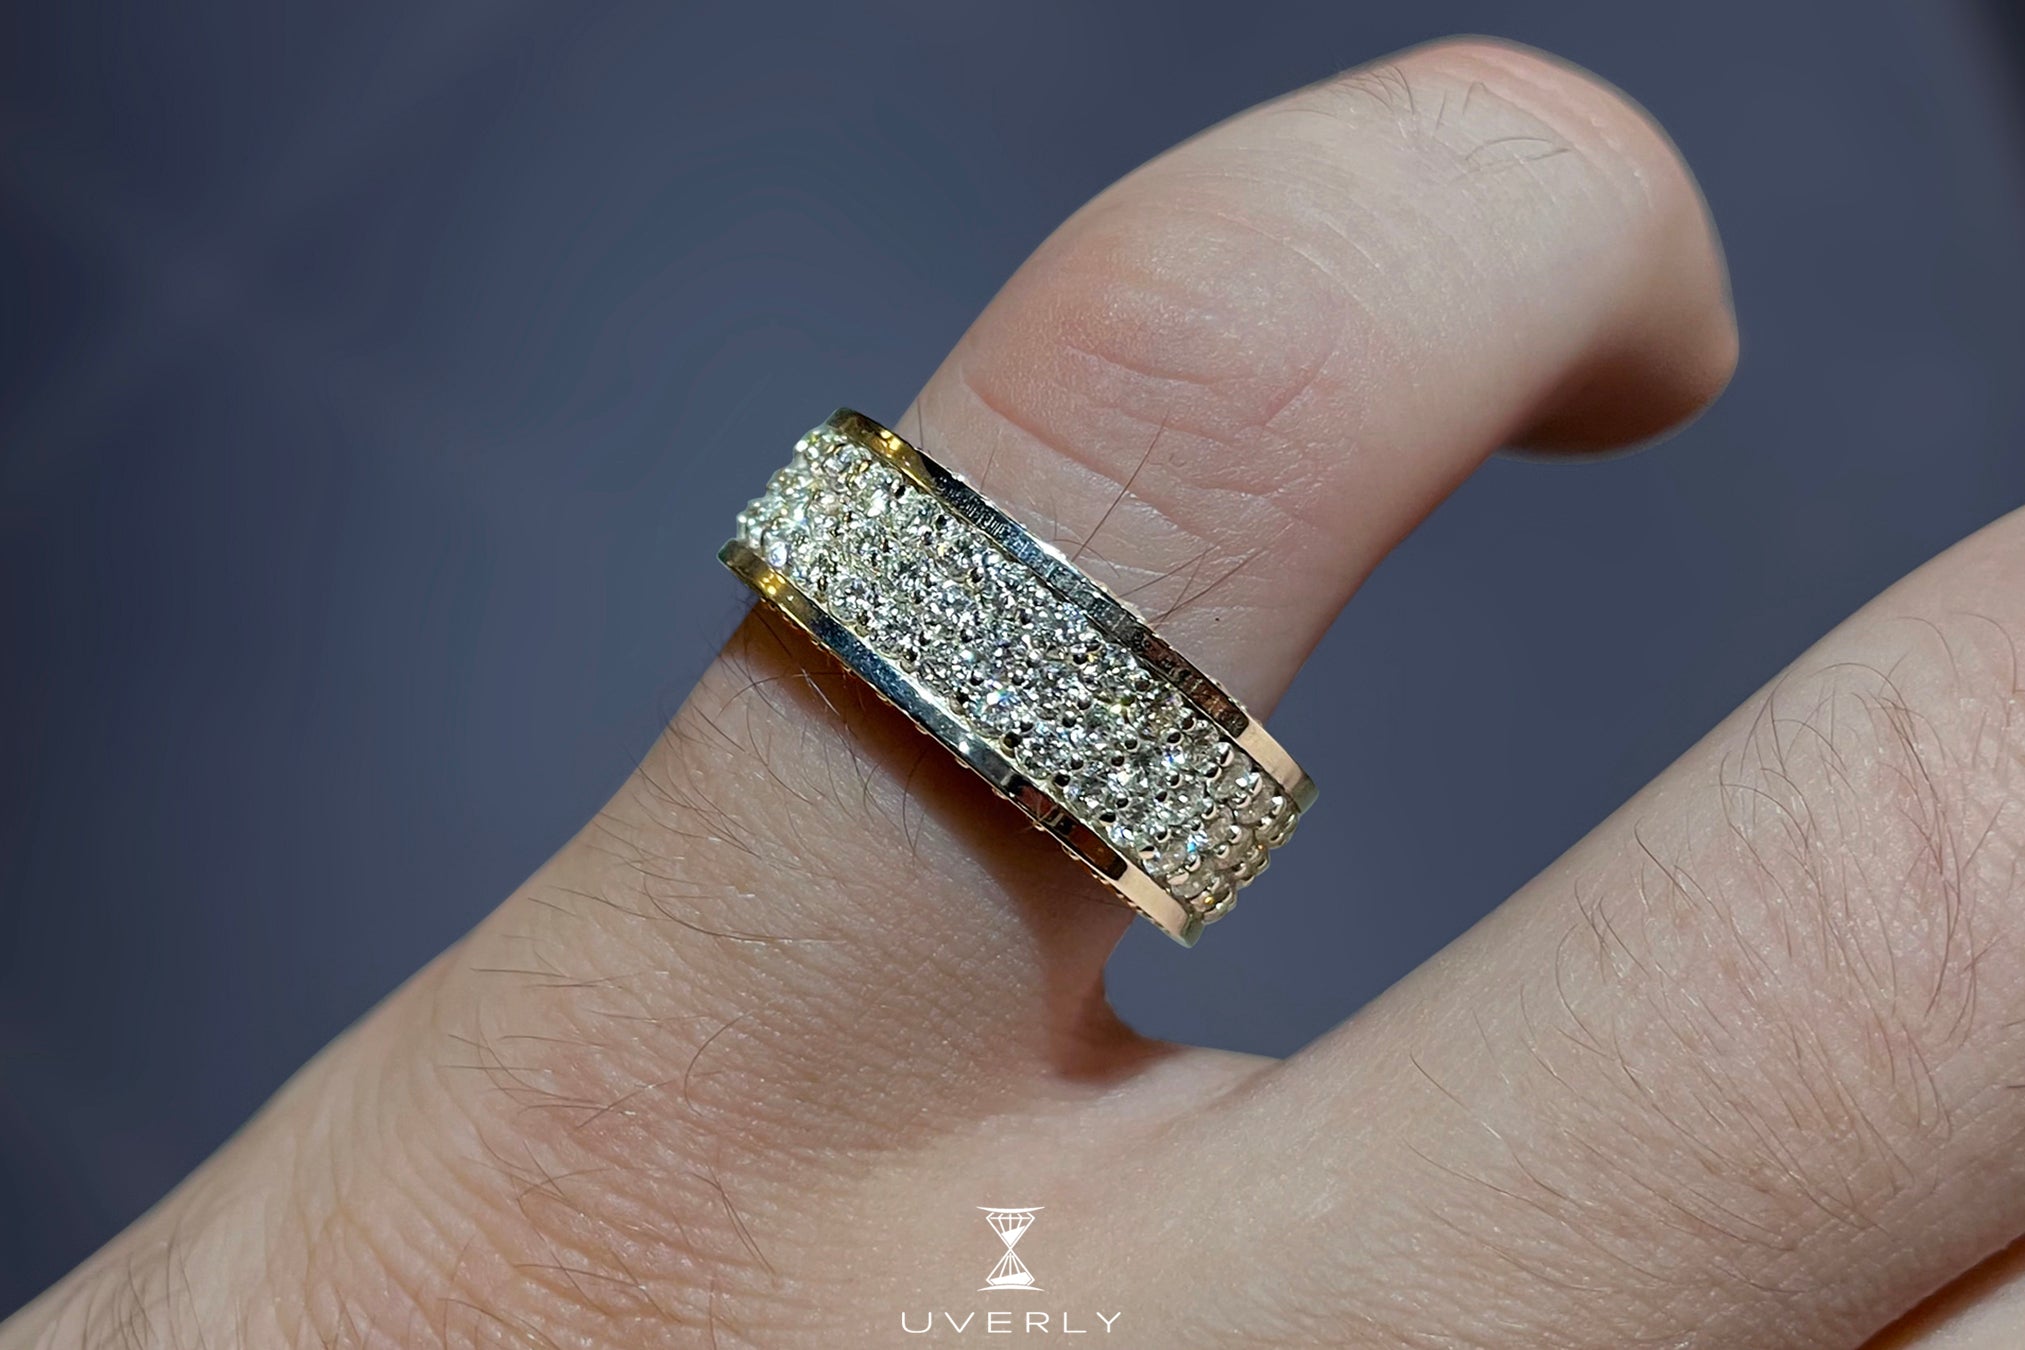 40+ Men's Diamond Ring Designs of 1 Carat With Price - Candere by Kalyan  Jewellers.